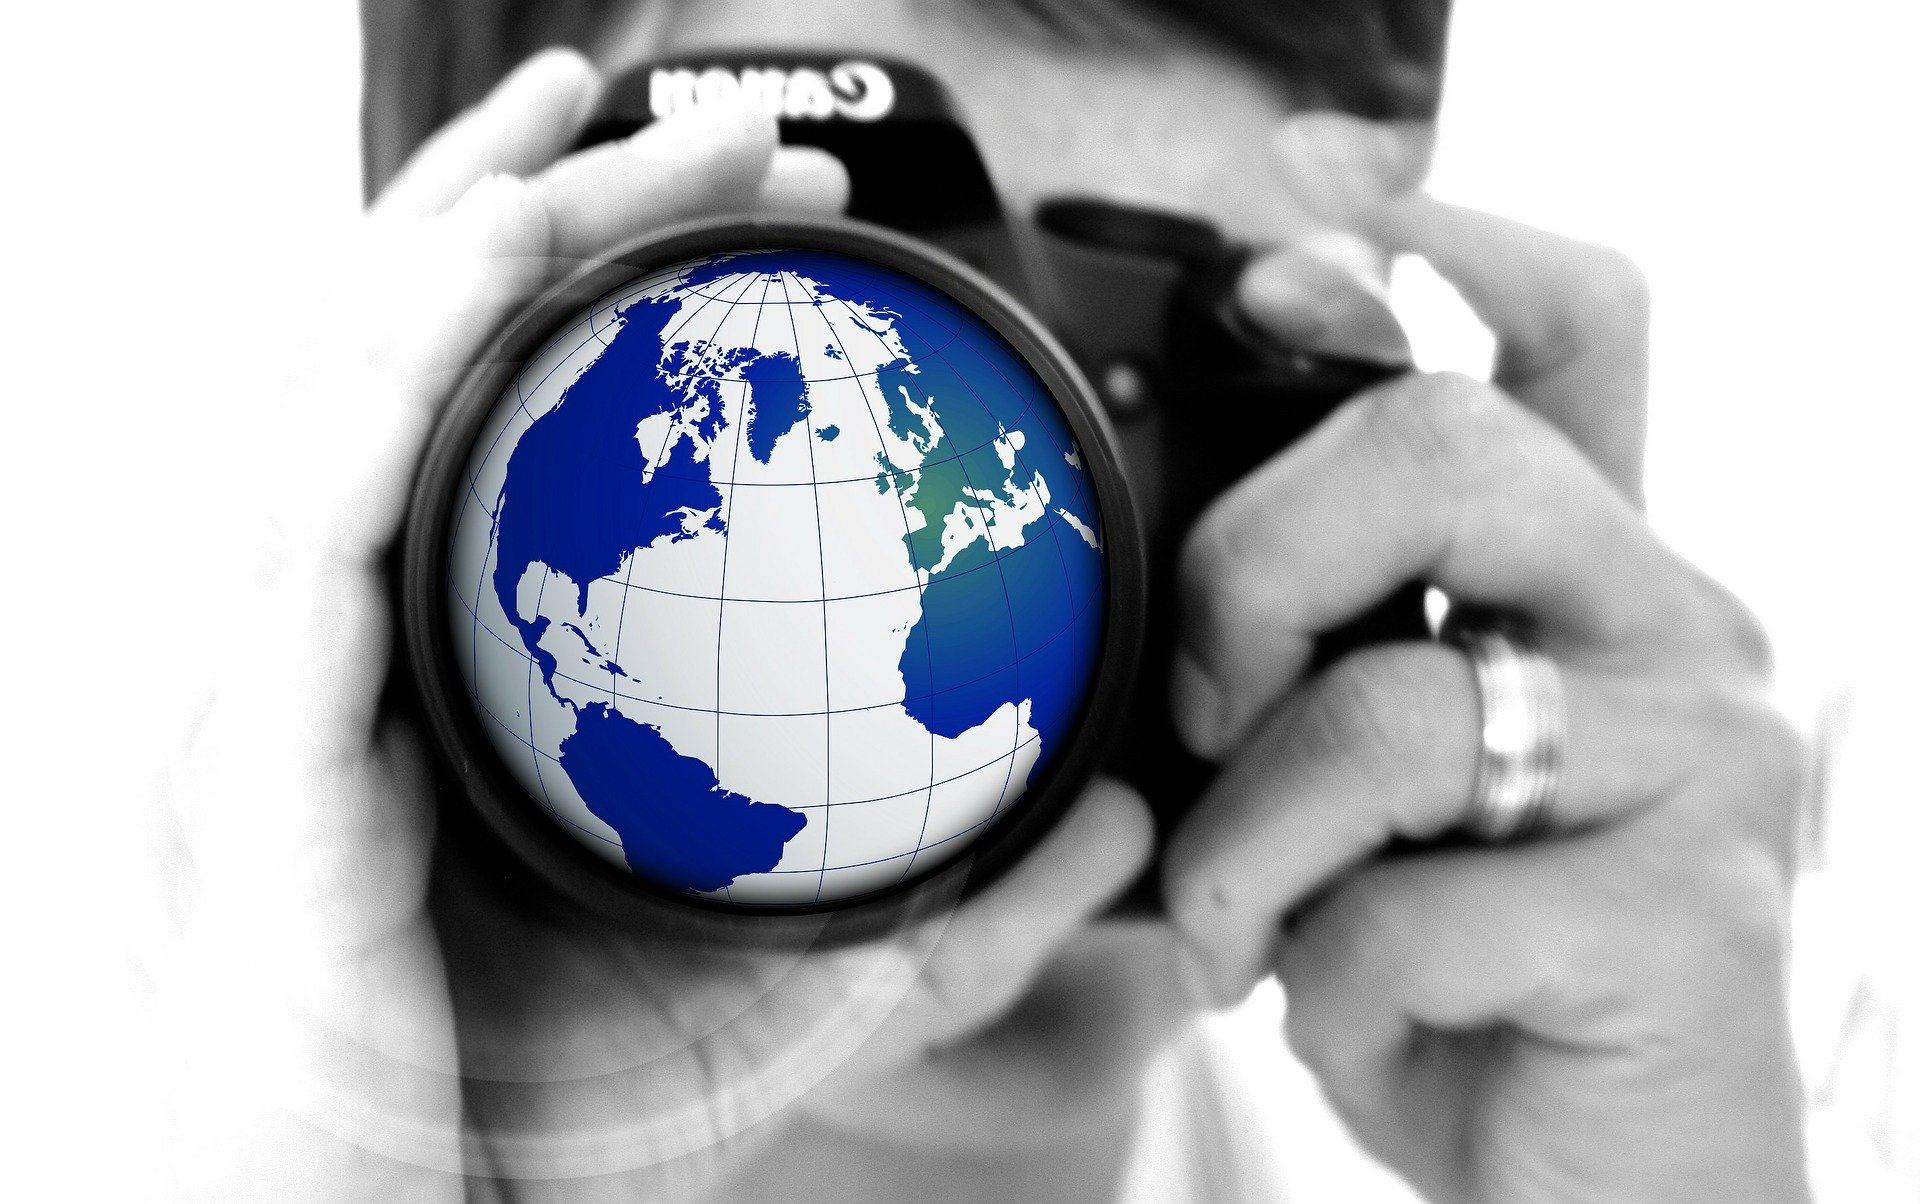 woman looking into a camera with a picture of a globe within the lens frame.